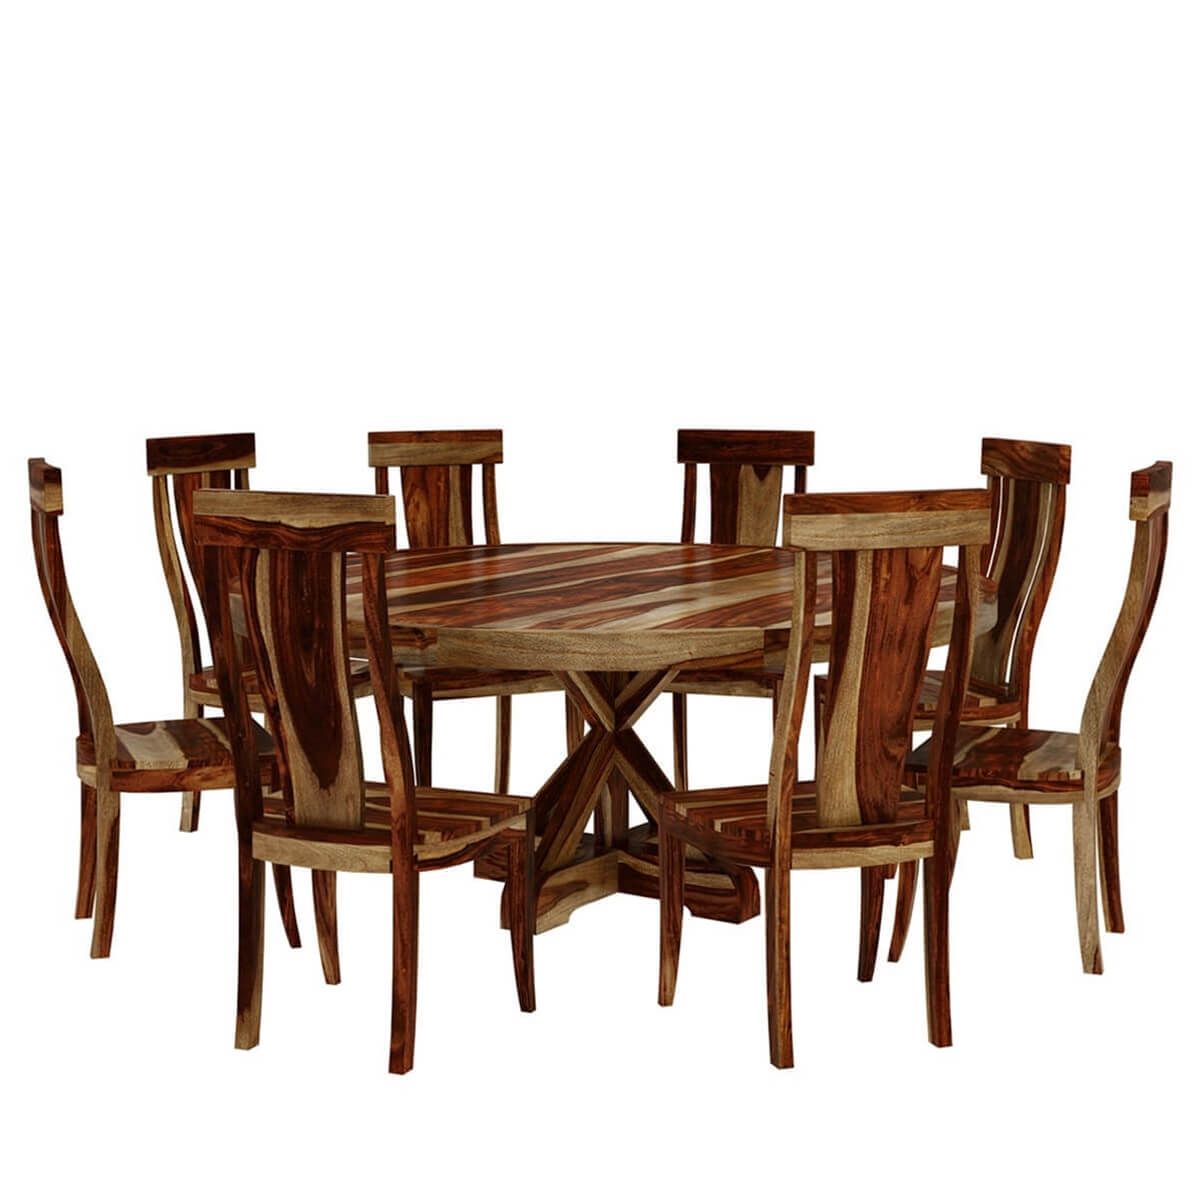 Most Recent Bedfo 3 Piece Dining Sets Pertaining To Bedford X Pedestal Rustic 72" Round Dining Table With 8 Chairs Set (View 5 of 20)